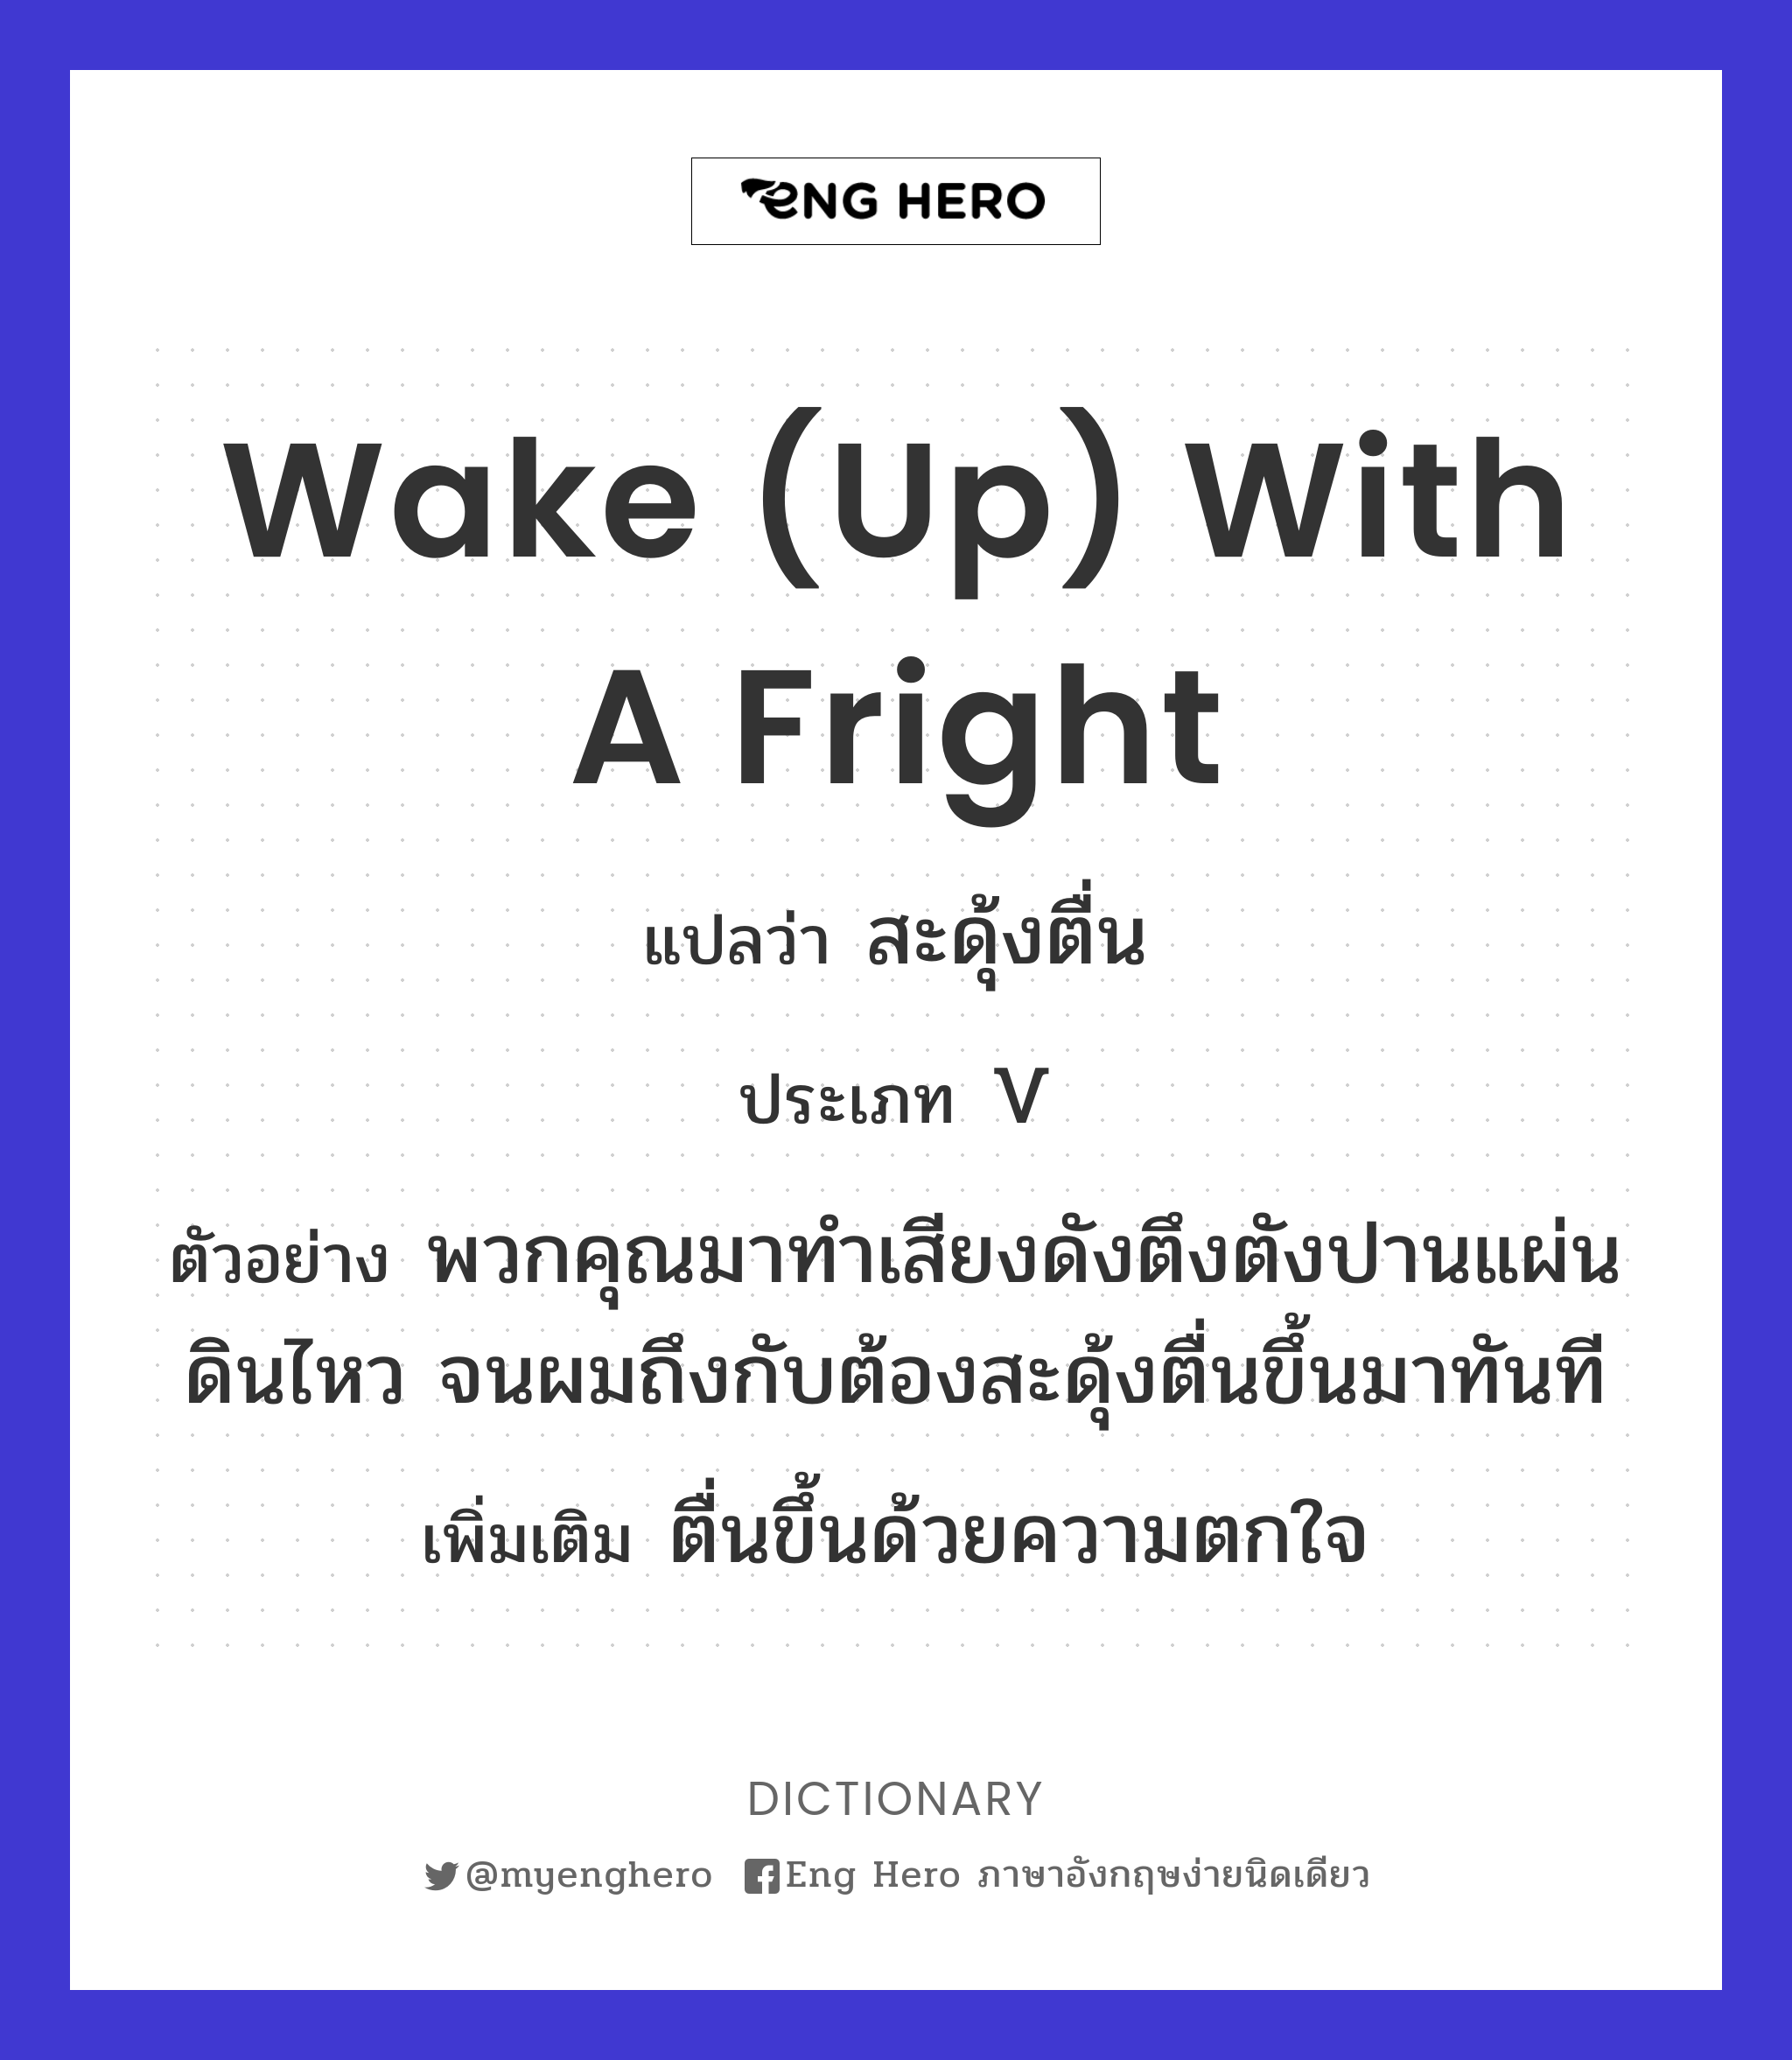 wake (up) with a fright